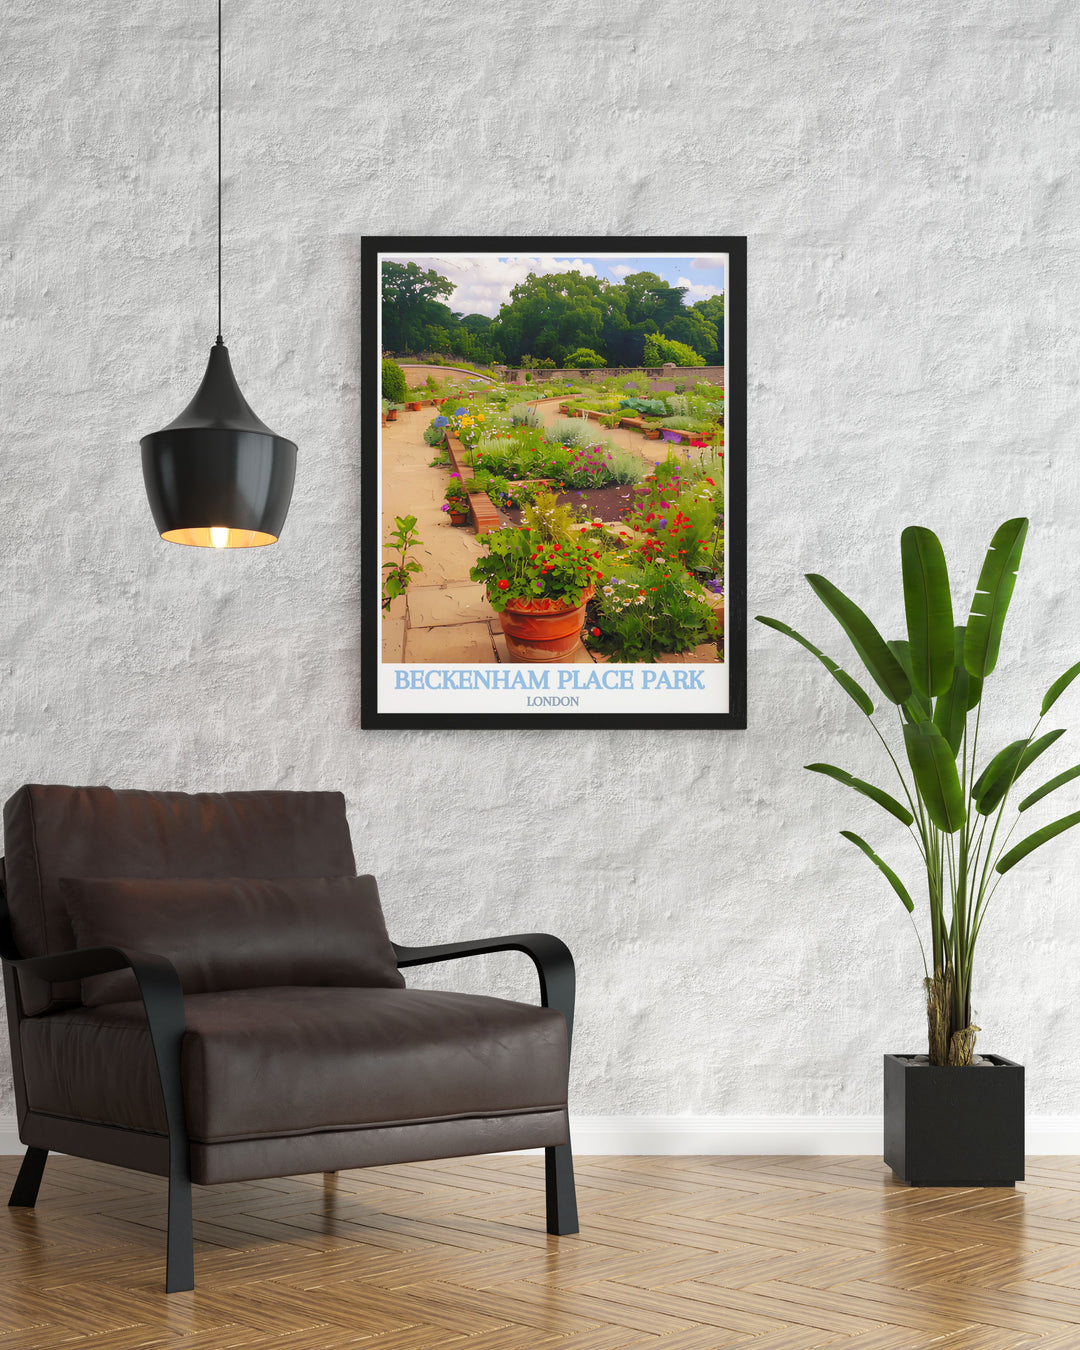 Art print of Beckenham Place Park highlighting the parks natural beauty and historical significance, featuring detailed illustrations of its lush landscapes and iconic structures, ideal for adding a touch of London elegance to any decor.